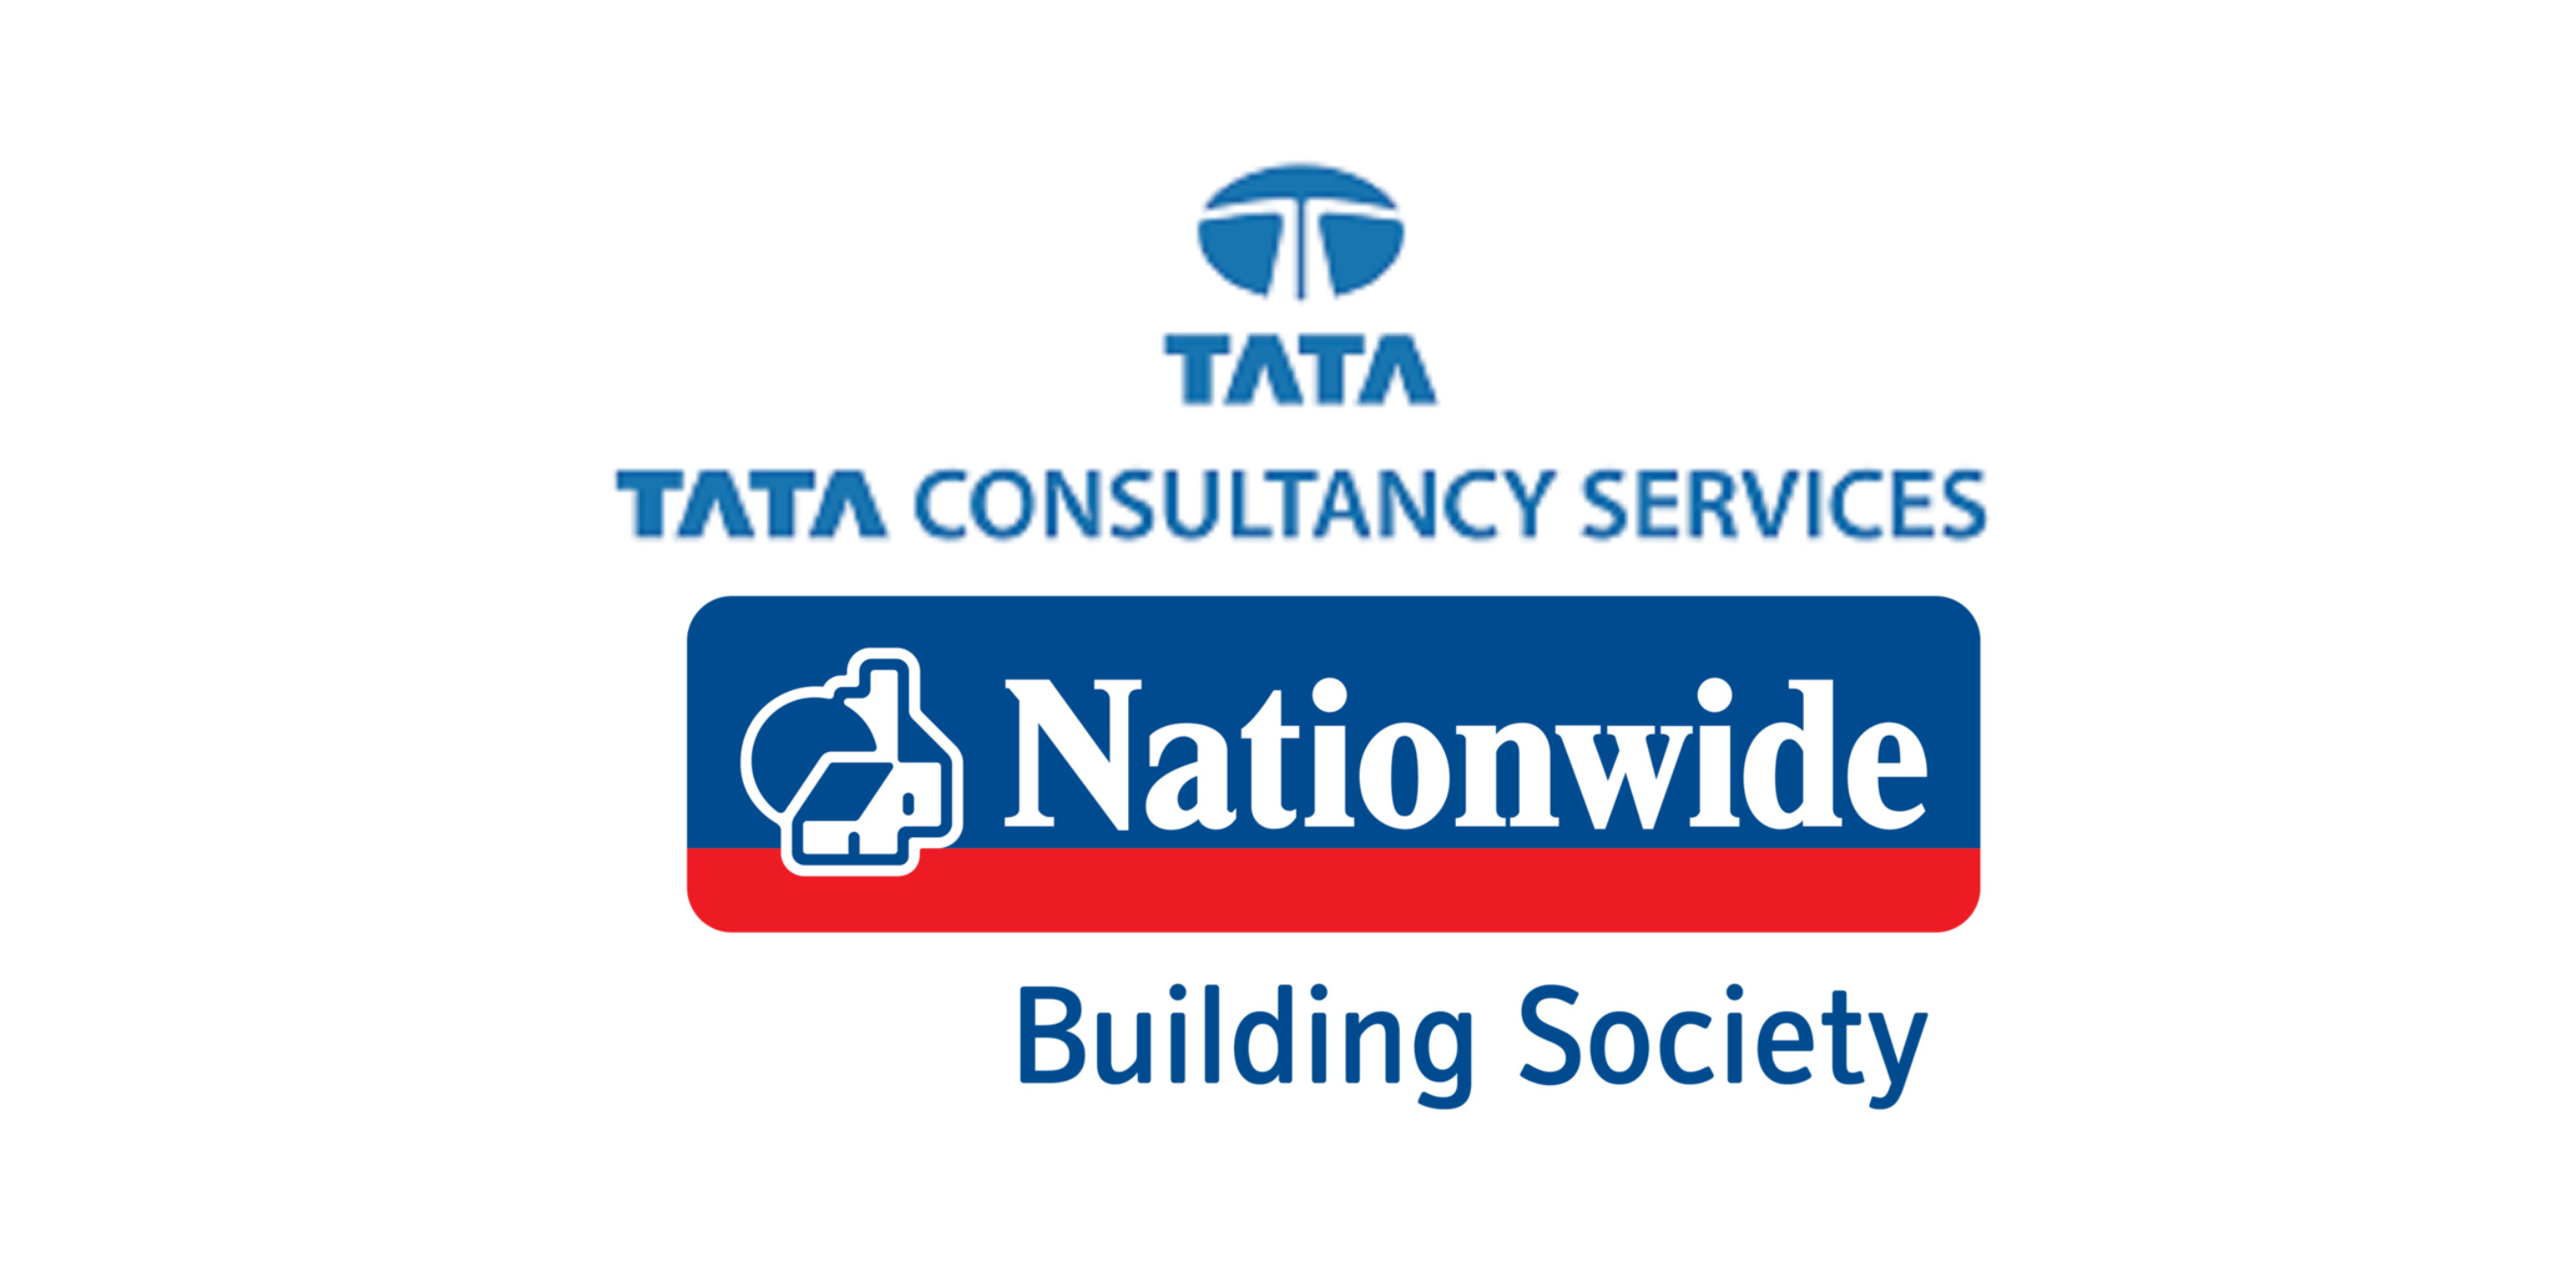 Nationwide Building Society Renews Strategic Partnership with TCS to Strengthen Agility and Operational Resilience